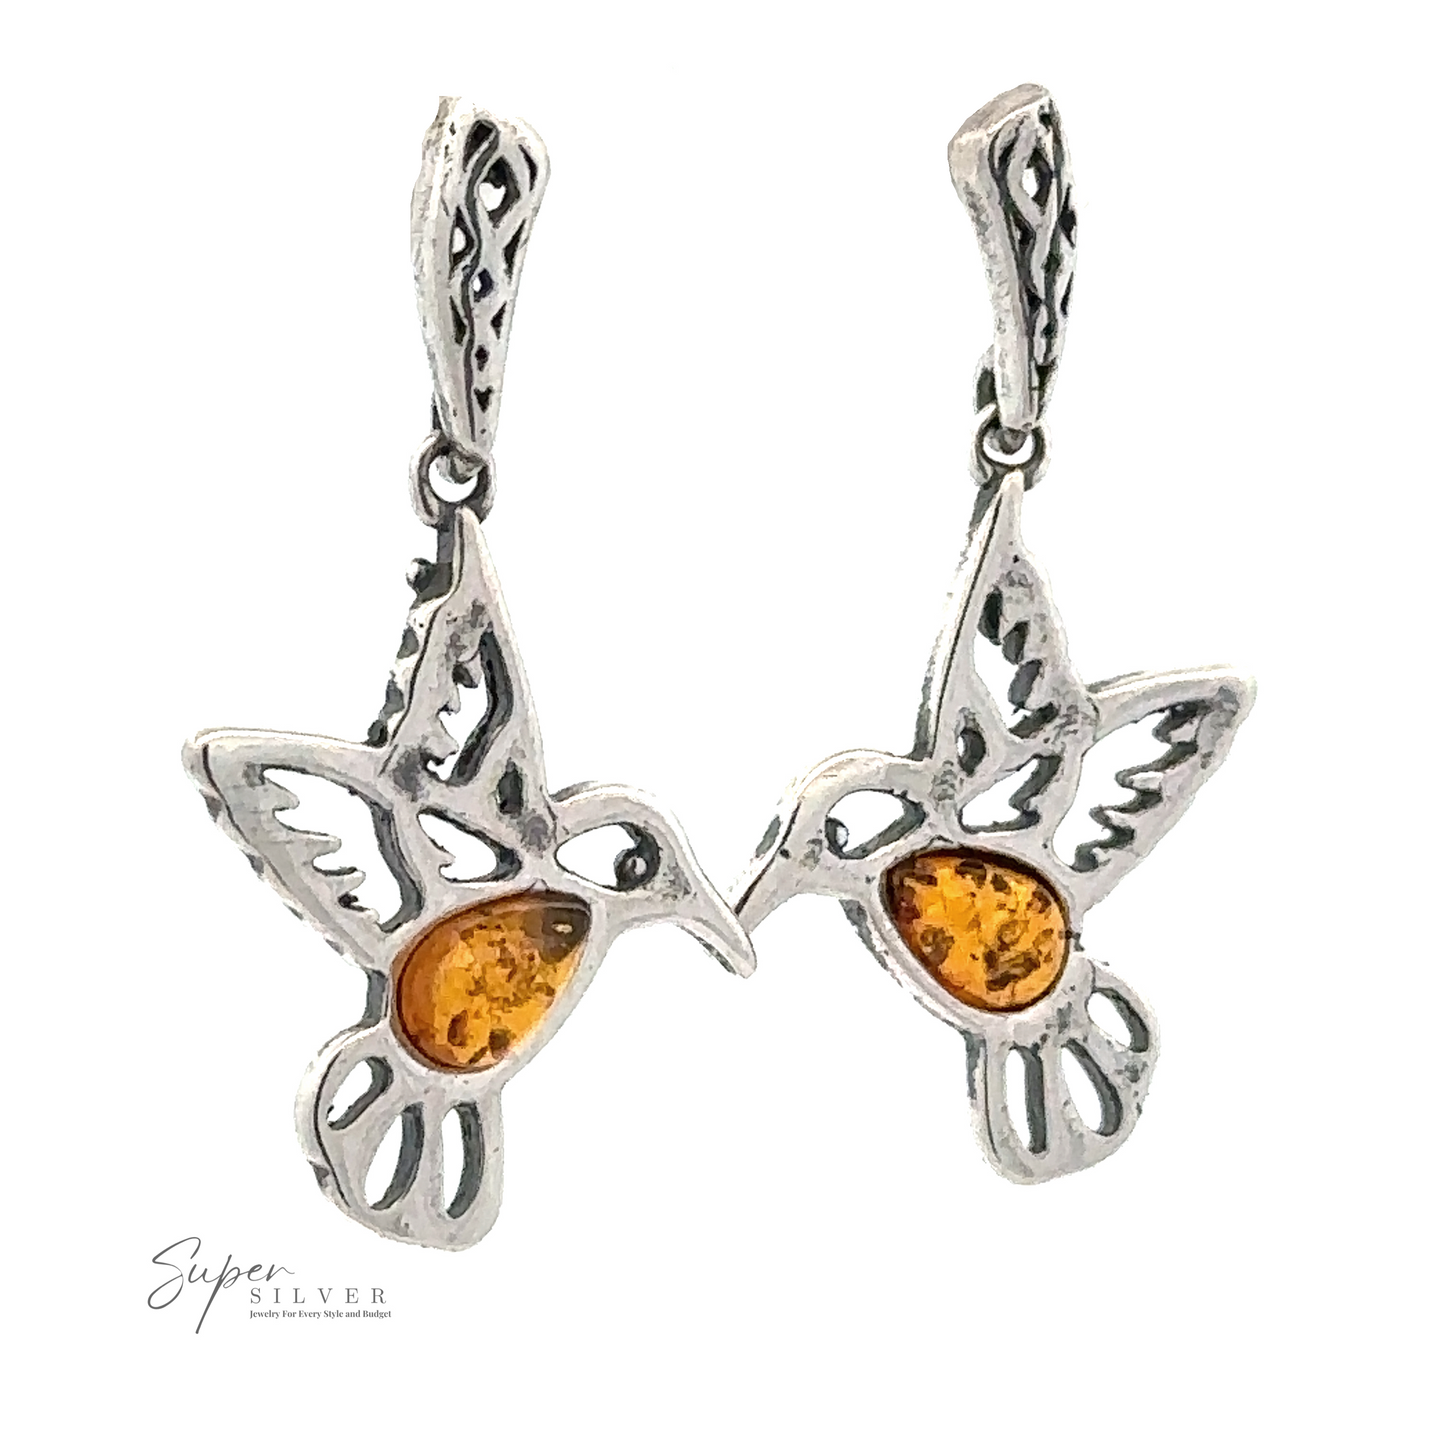 
                  
                    Amber Hummingbird Earrings with intricate designs and amber-colored stones made from Baltic Amber. The brand "Super Silver" is visible in the lower left corner.
                  
                